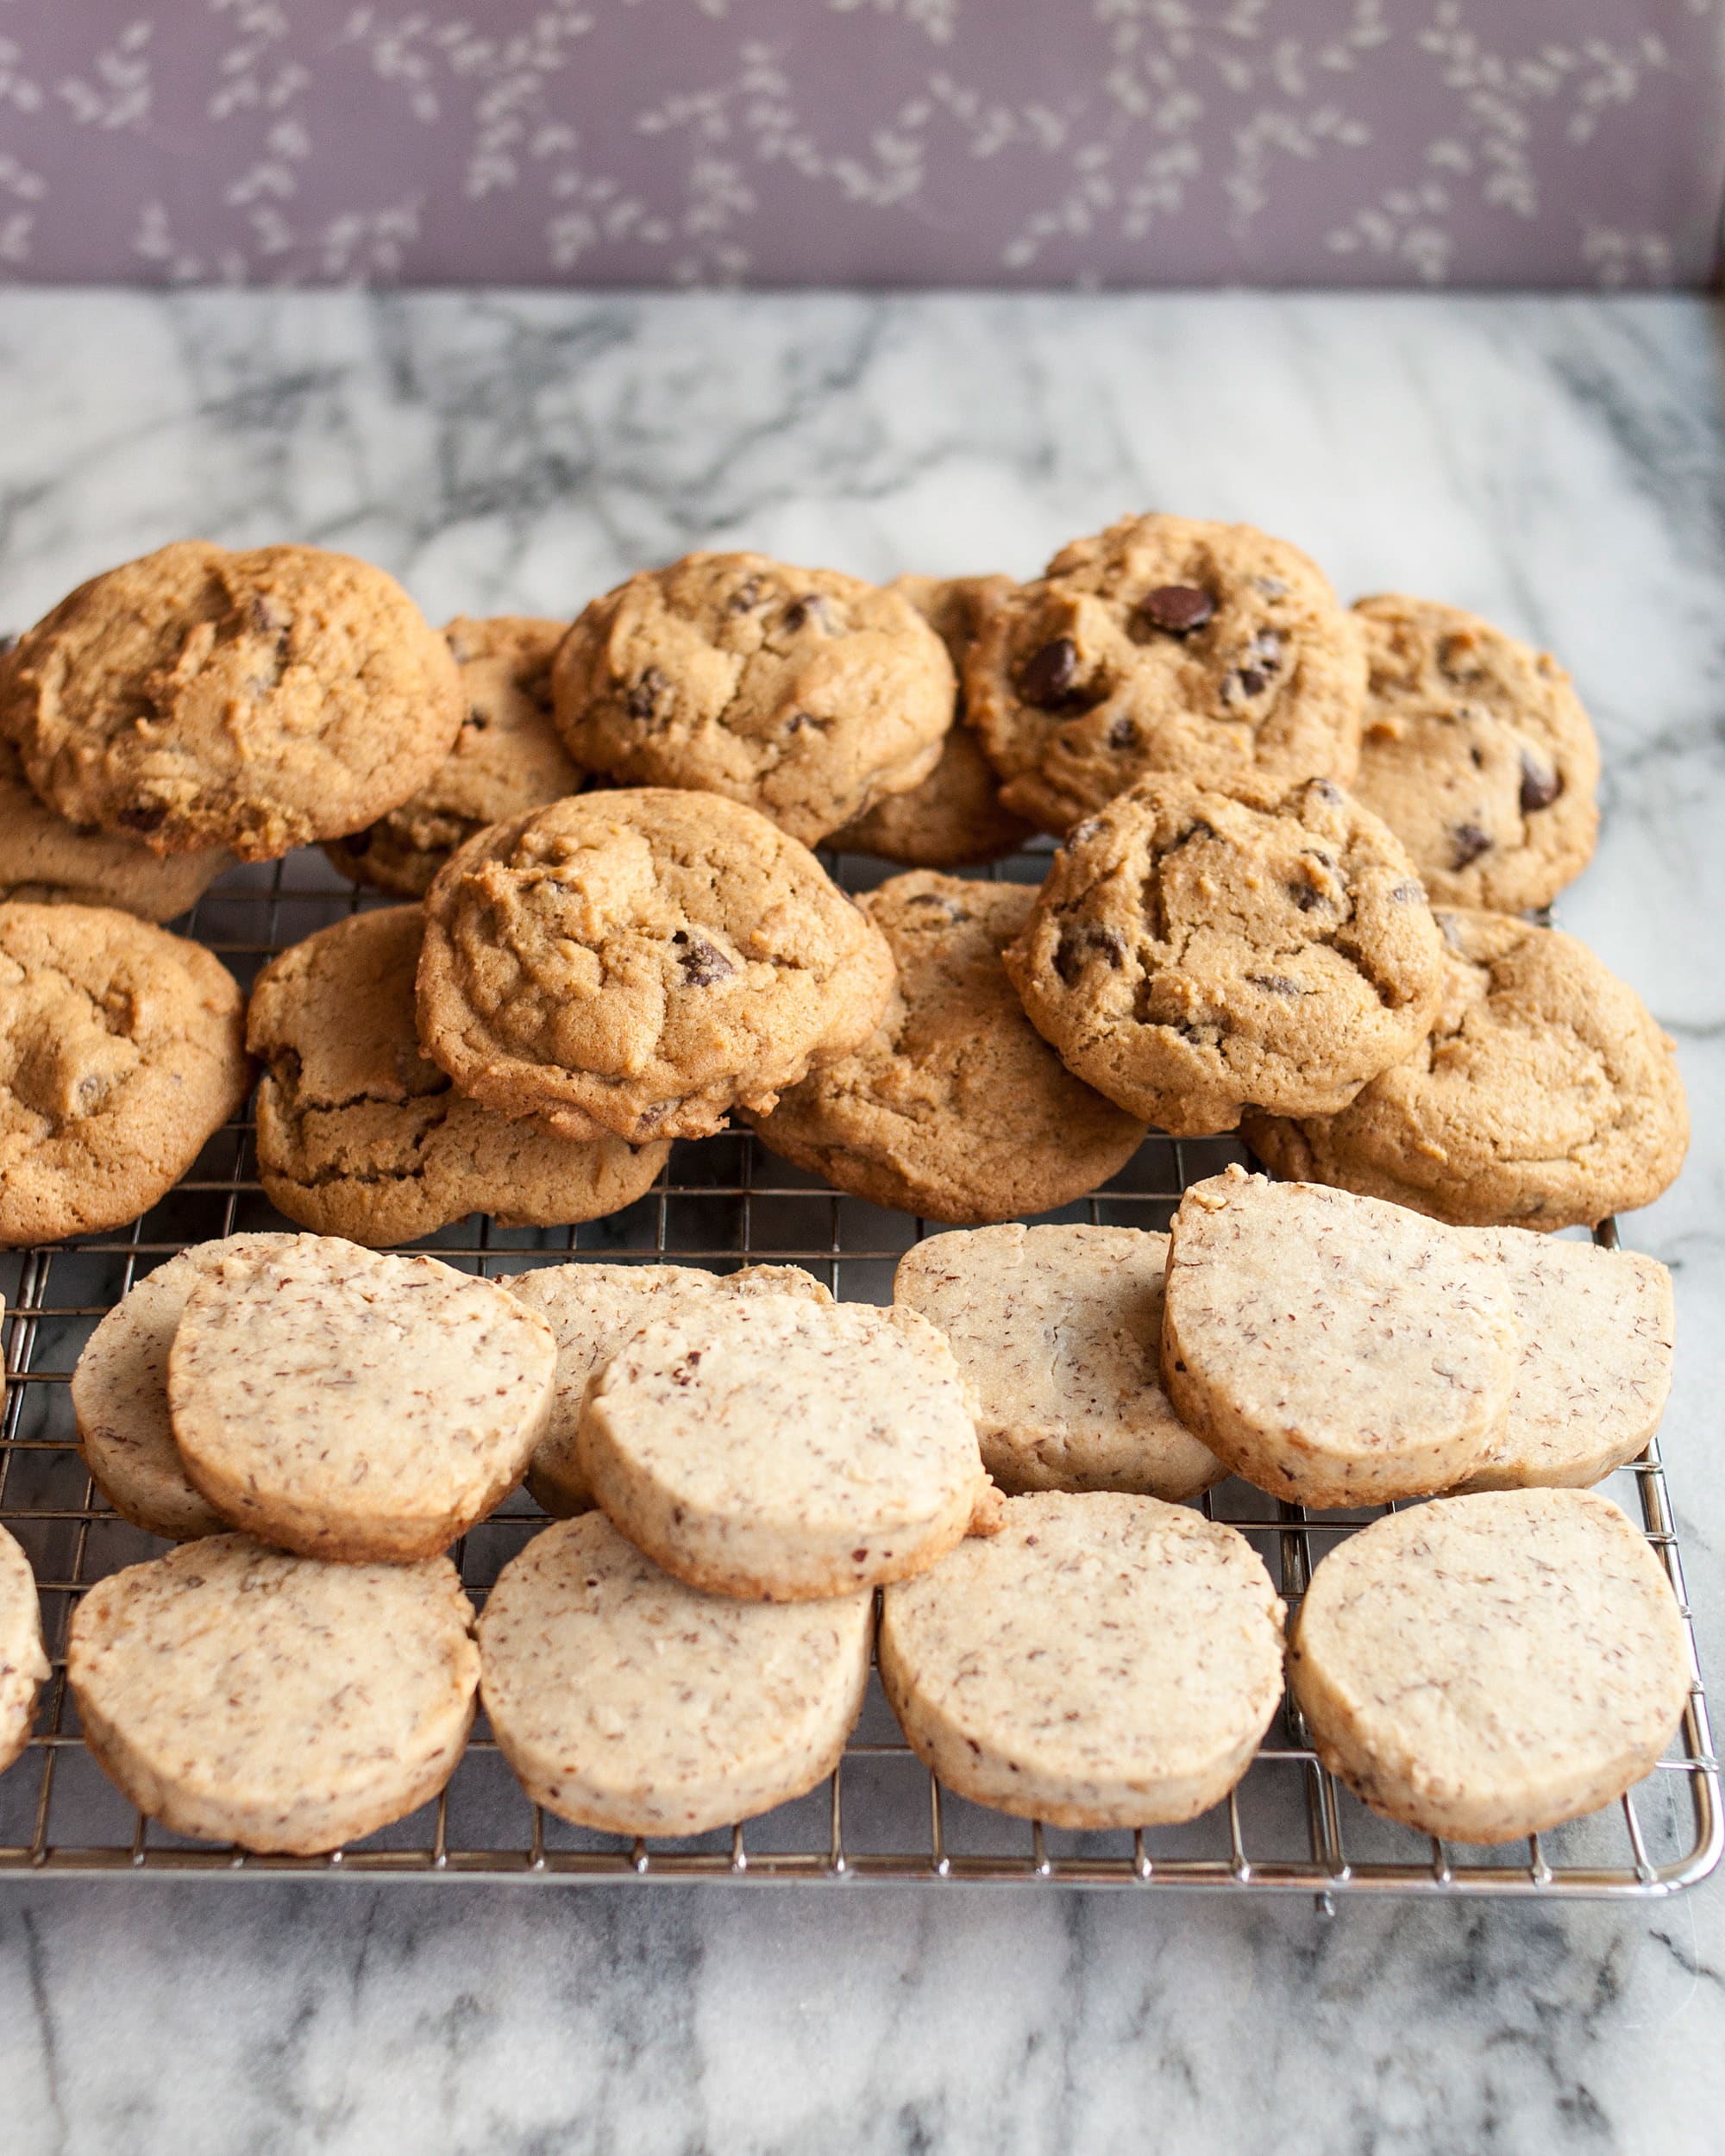 Why You Should Use 2 Baking Sheets At Once For Some Cookie Types